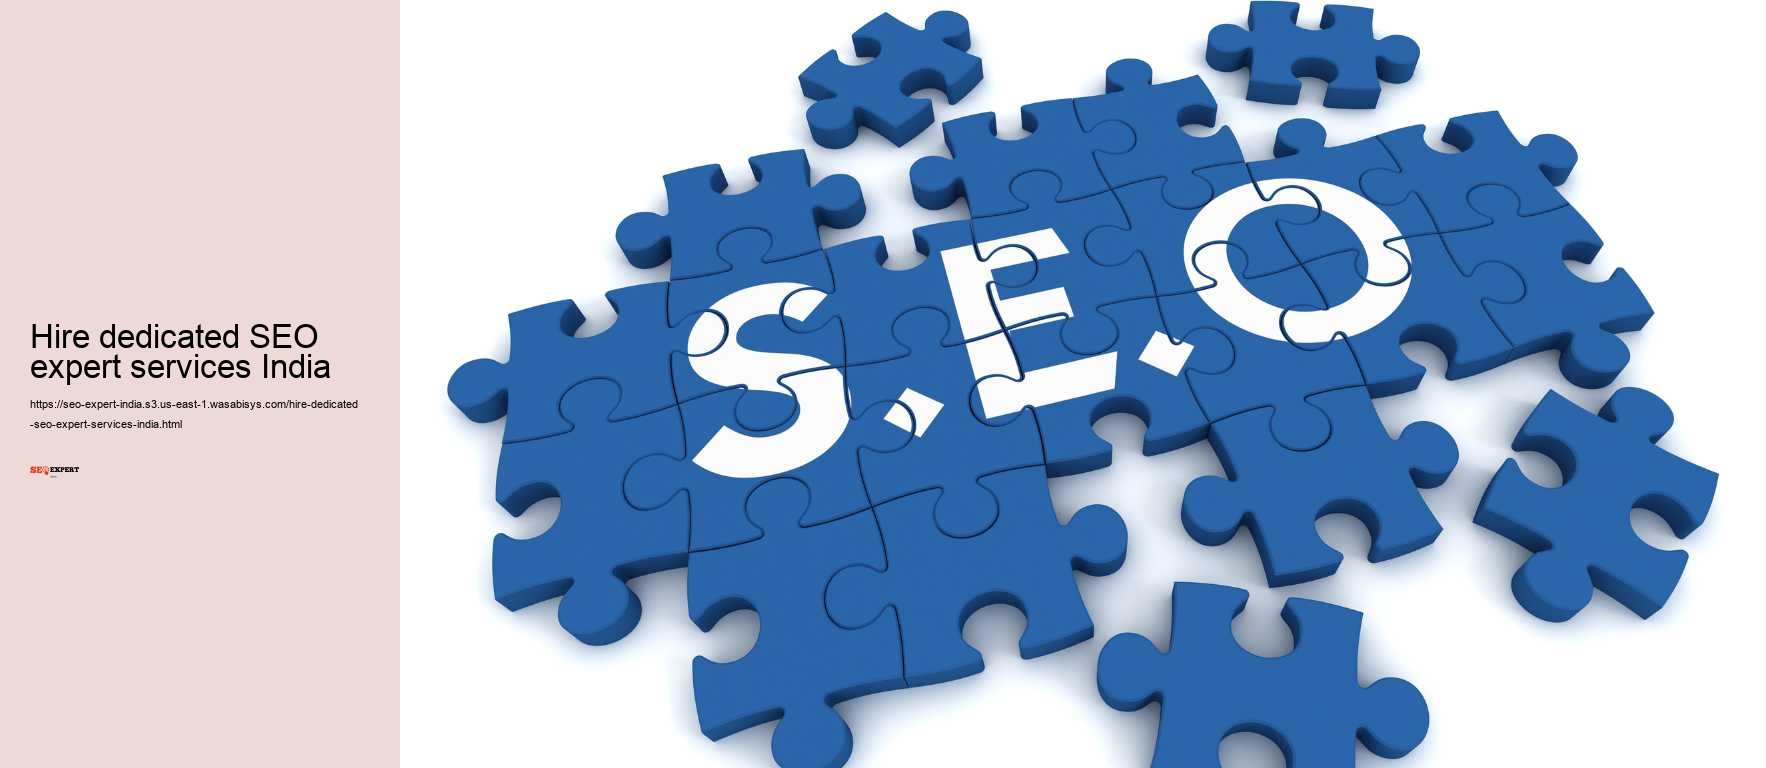 Hire dedicated SEO expert services India